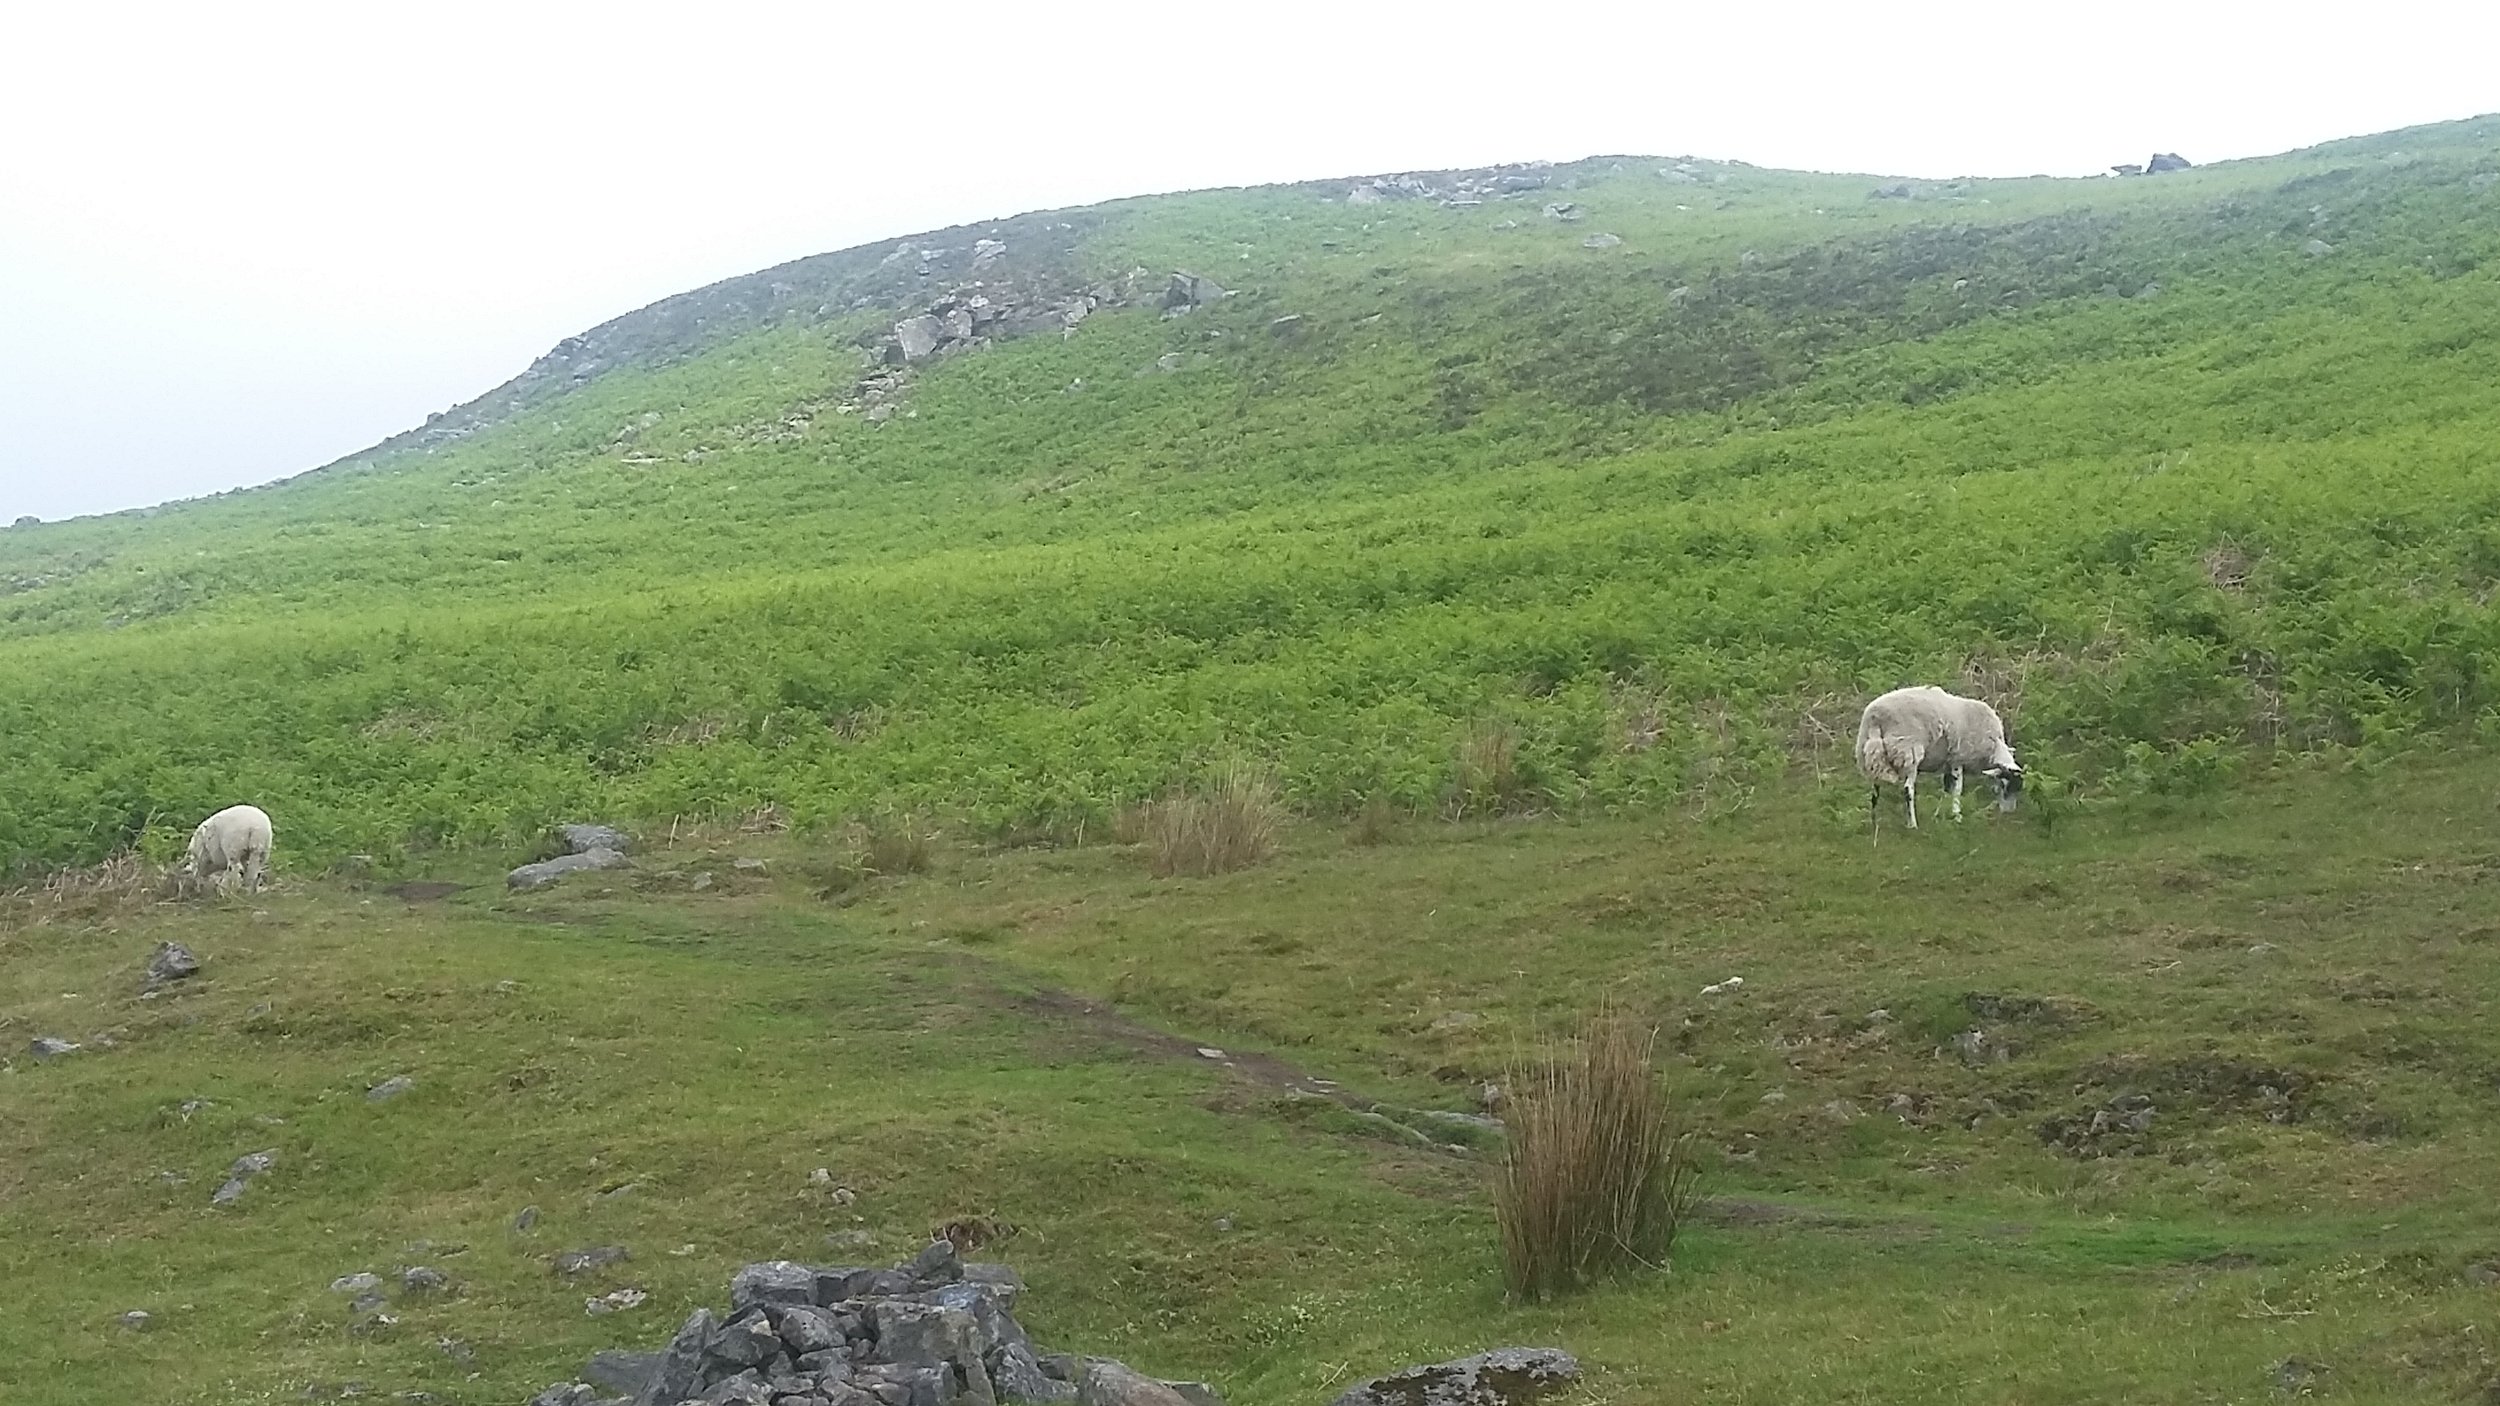  All plots are open to sheep grazing 